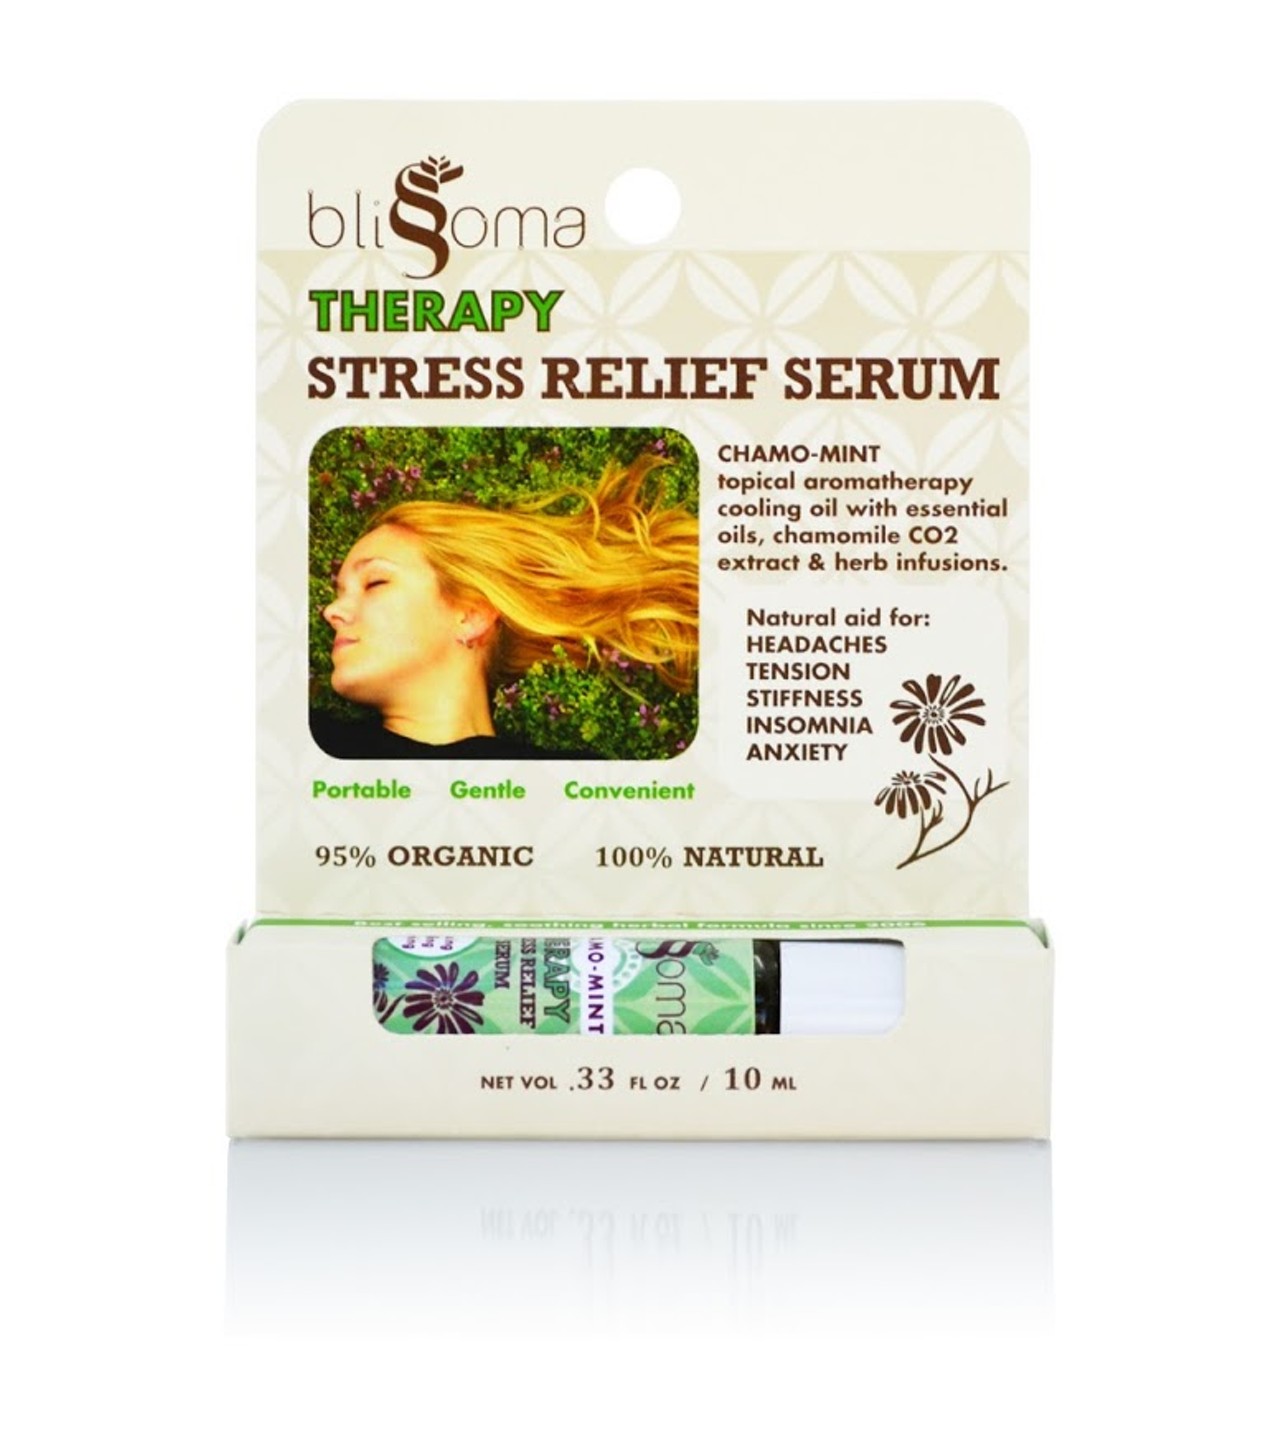 Blissoma Holistic Care and Apothecary
This local, cruelty-free personal care shop carries a wide variety of products for both men and women. We probably all could benefit from the stress relief serum (pictured) heading into the new year. Photo courtesy of Blissoma.